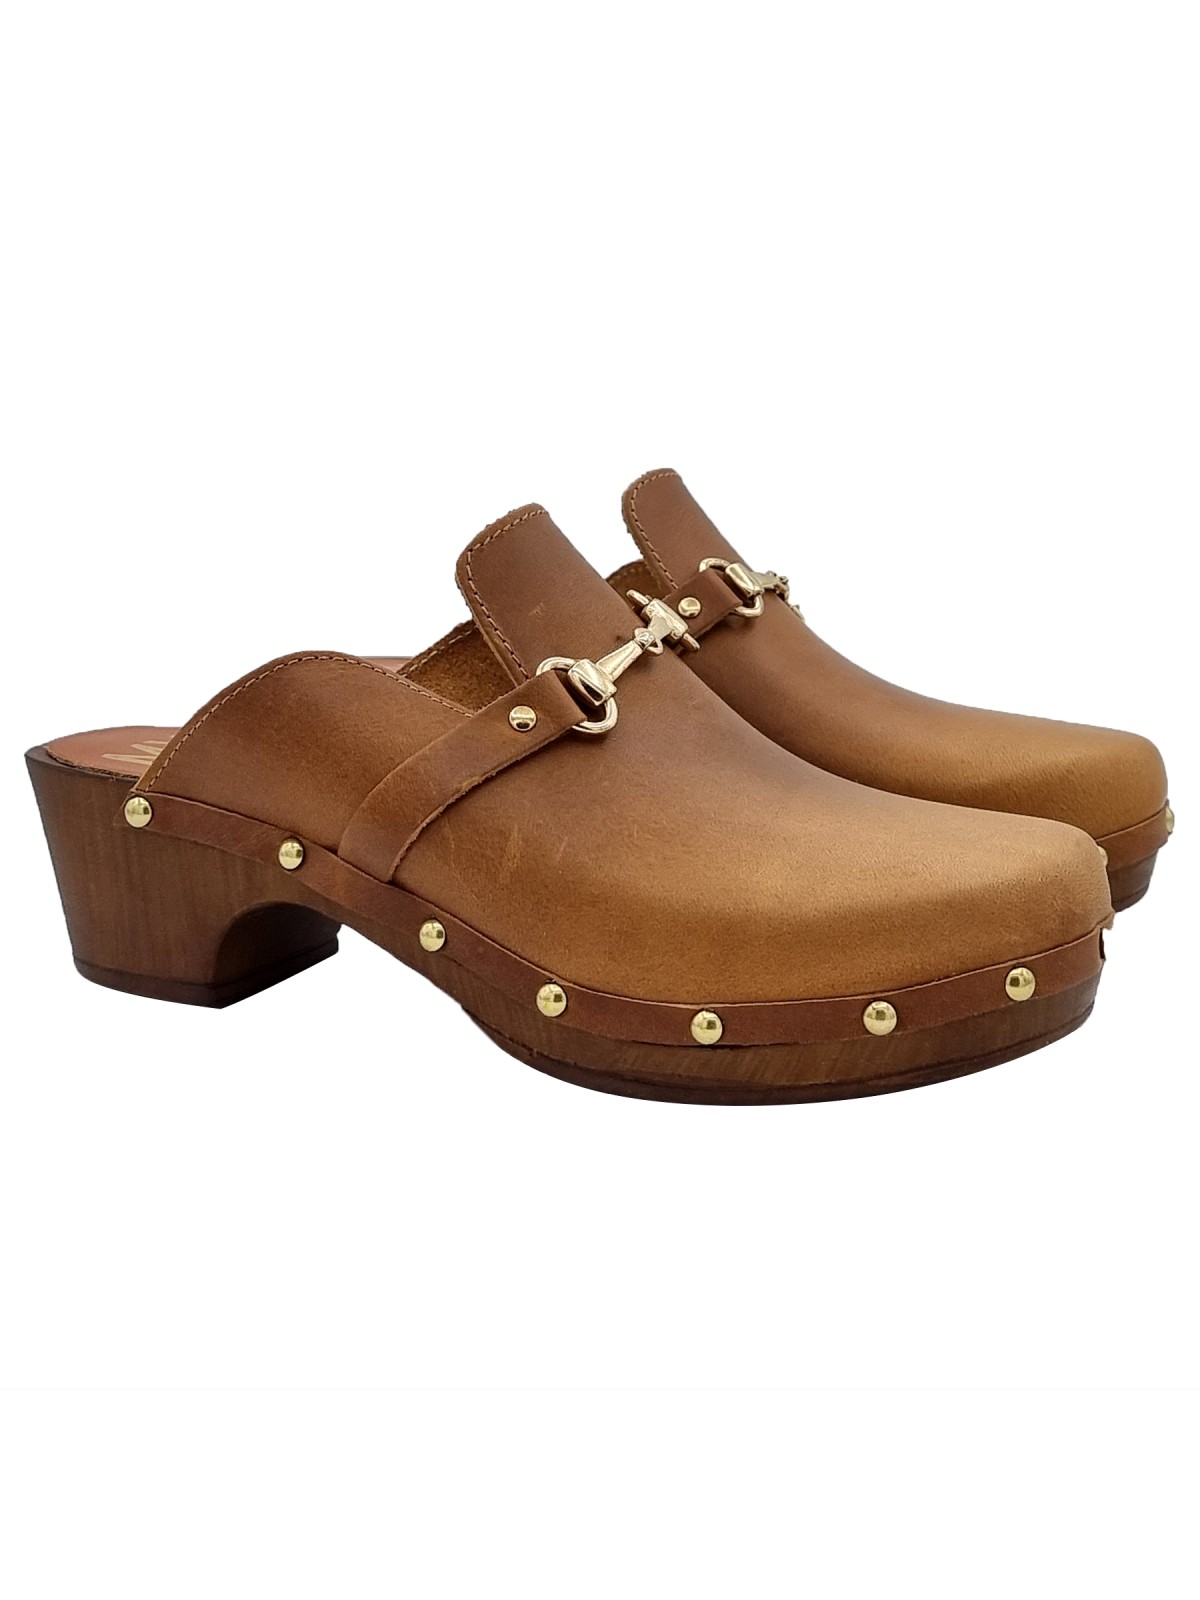 LEATHER DUTCH CLOGS WITH GOLD ACCESSORY